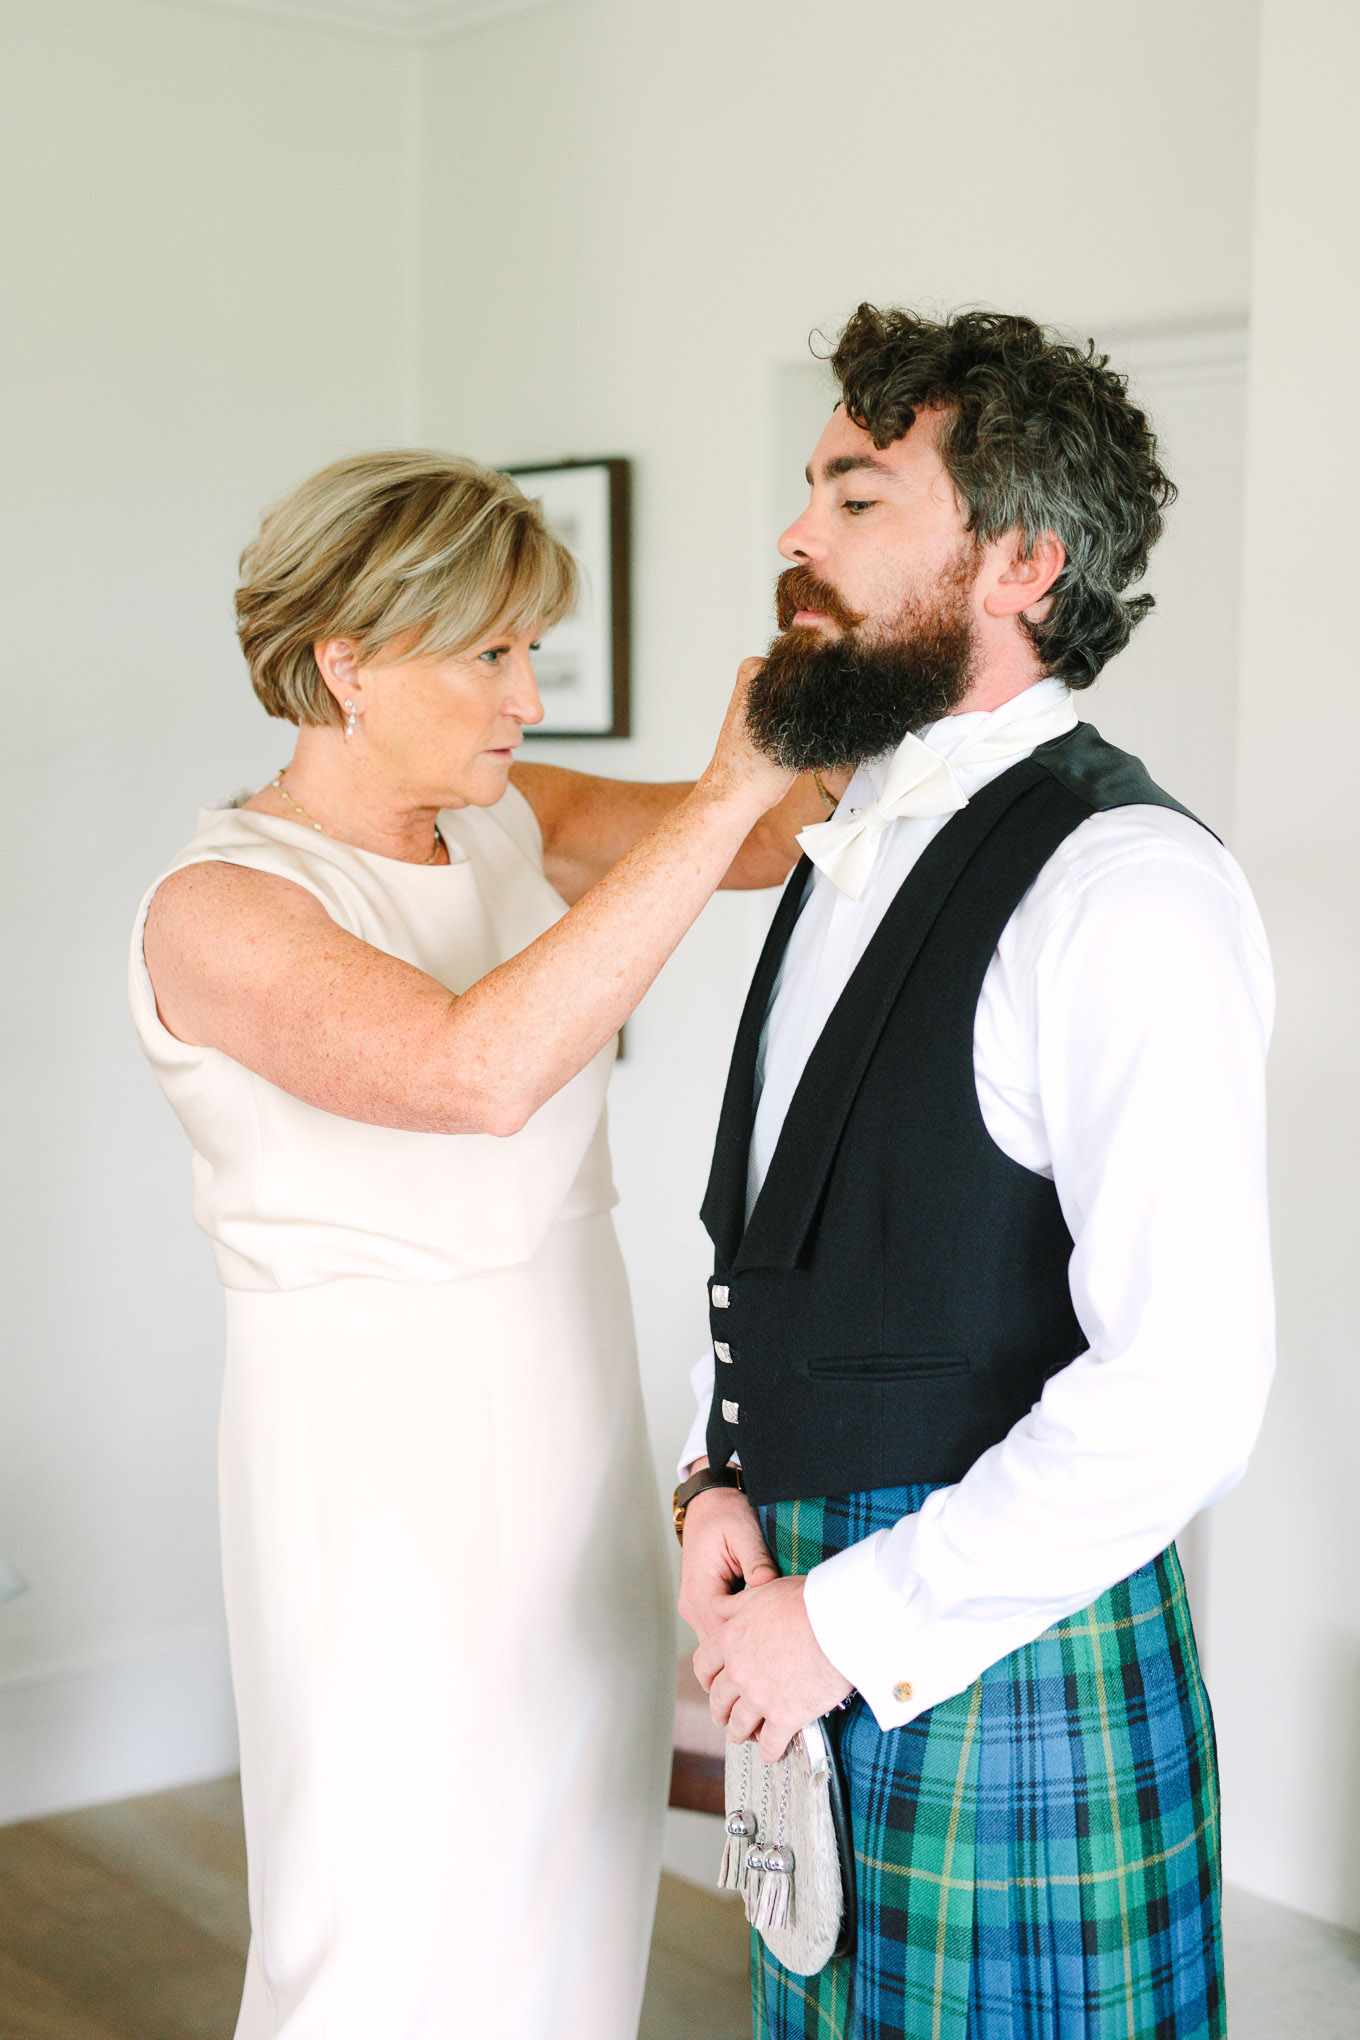 Mother of the bride helping son dress in traditional Scottish kilt. Millbrook Resort Queenstown New Zealand wedding by Mary Costa Photography | www.marycostaweddings.com